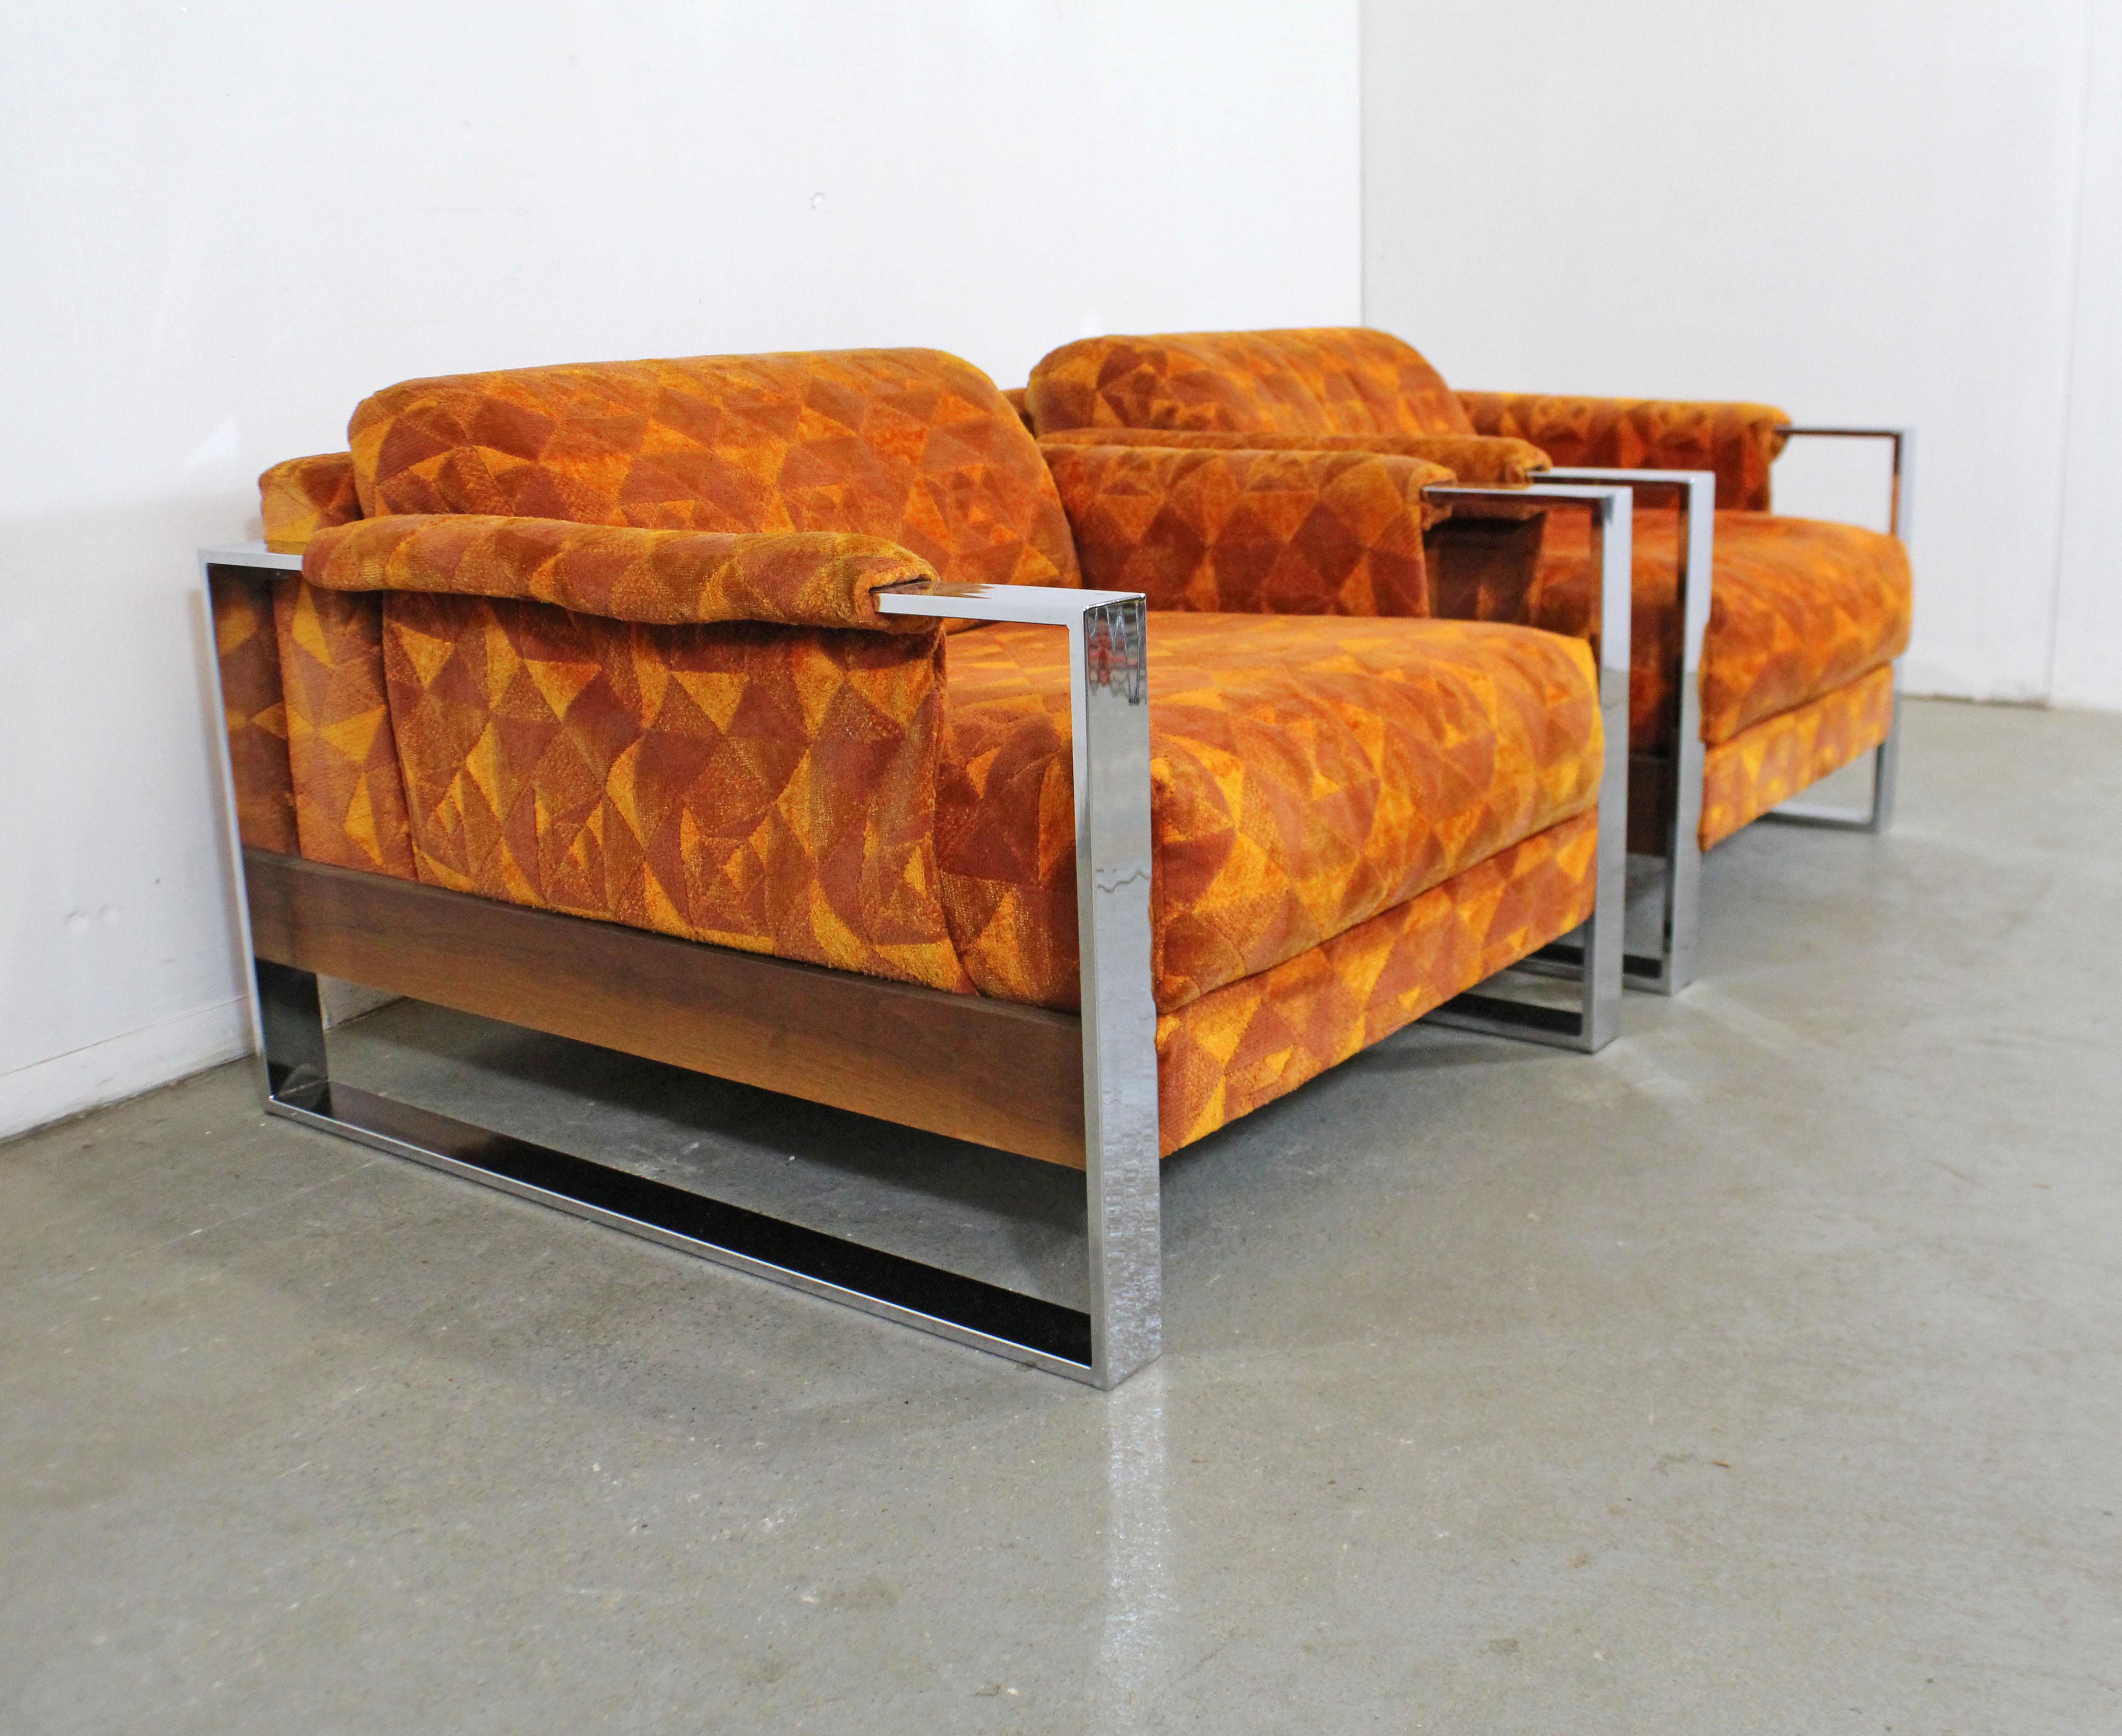 What a find. Offered is a pair of rare vintage Mid-Century Modern lounge chairs, designed by Adrian Pearsall for Craft Associates. These chairs feature geometric orange upholstery and chrome bases. They are in good condition, showing slight age wear